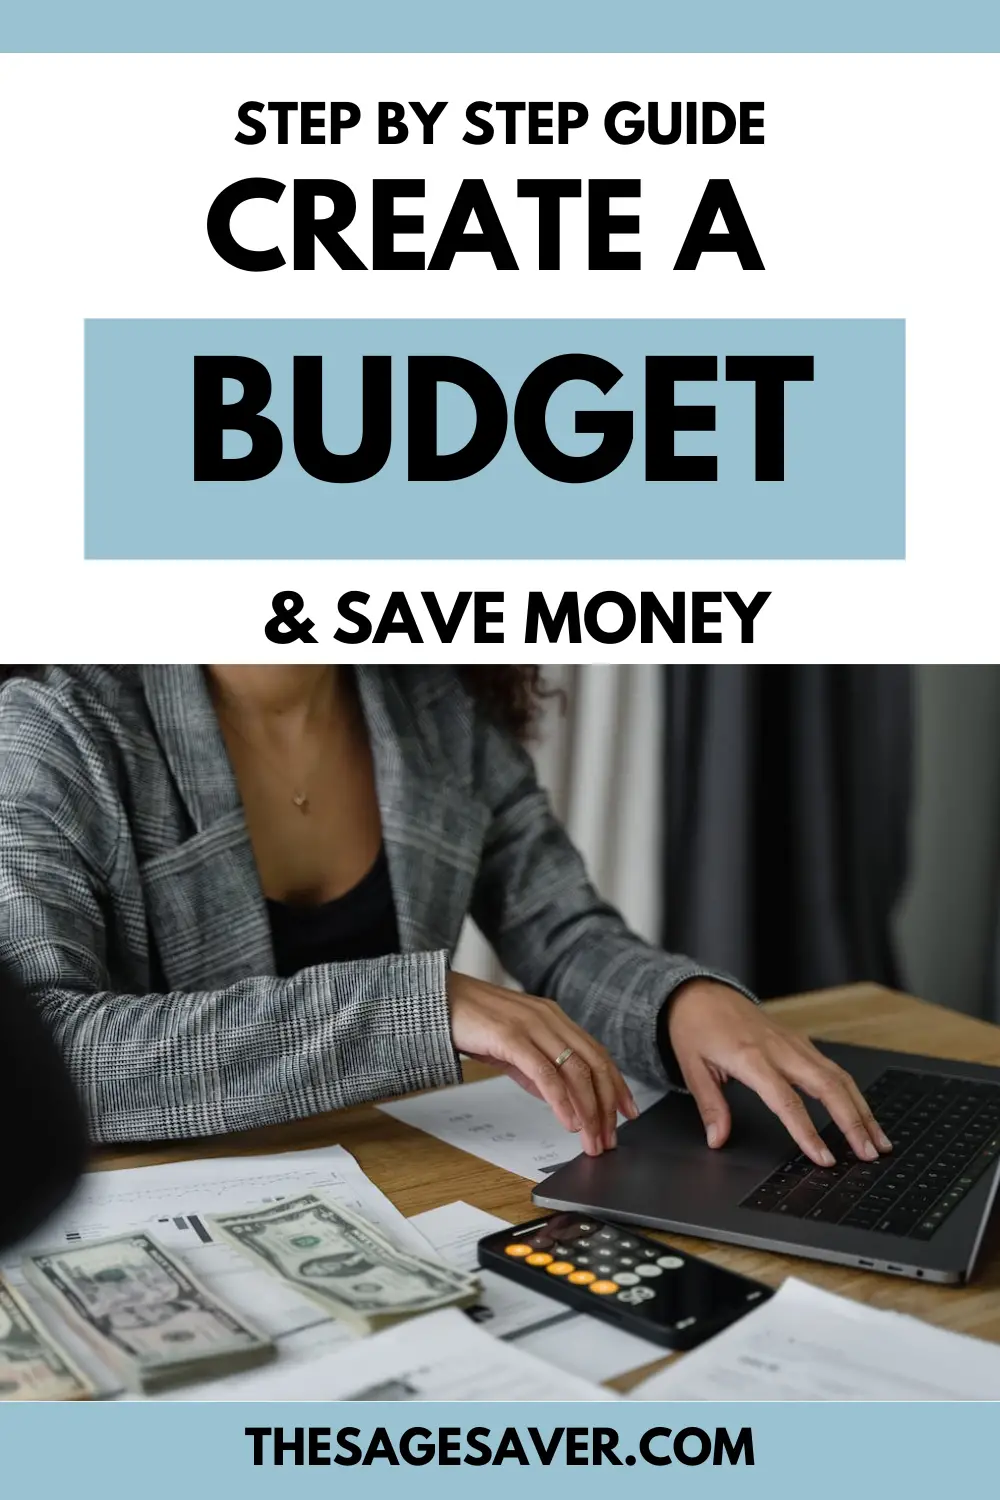 How to Create a Budget to Save Money